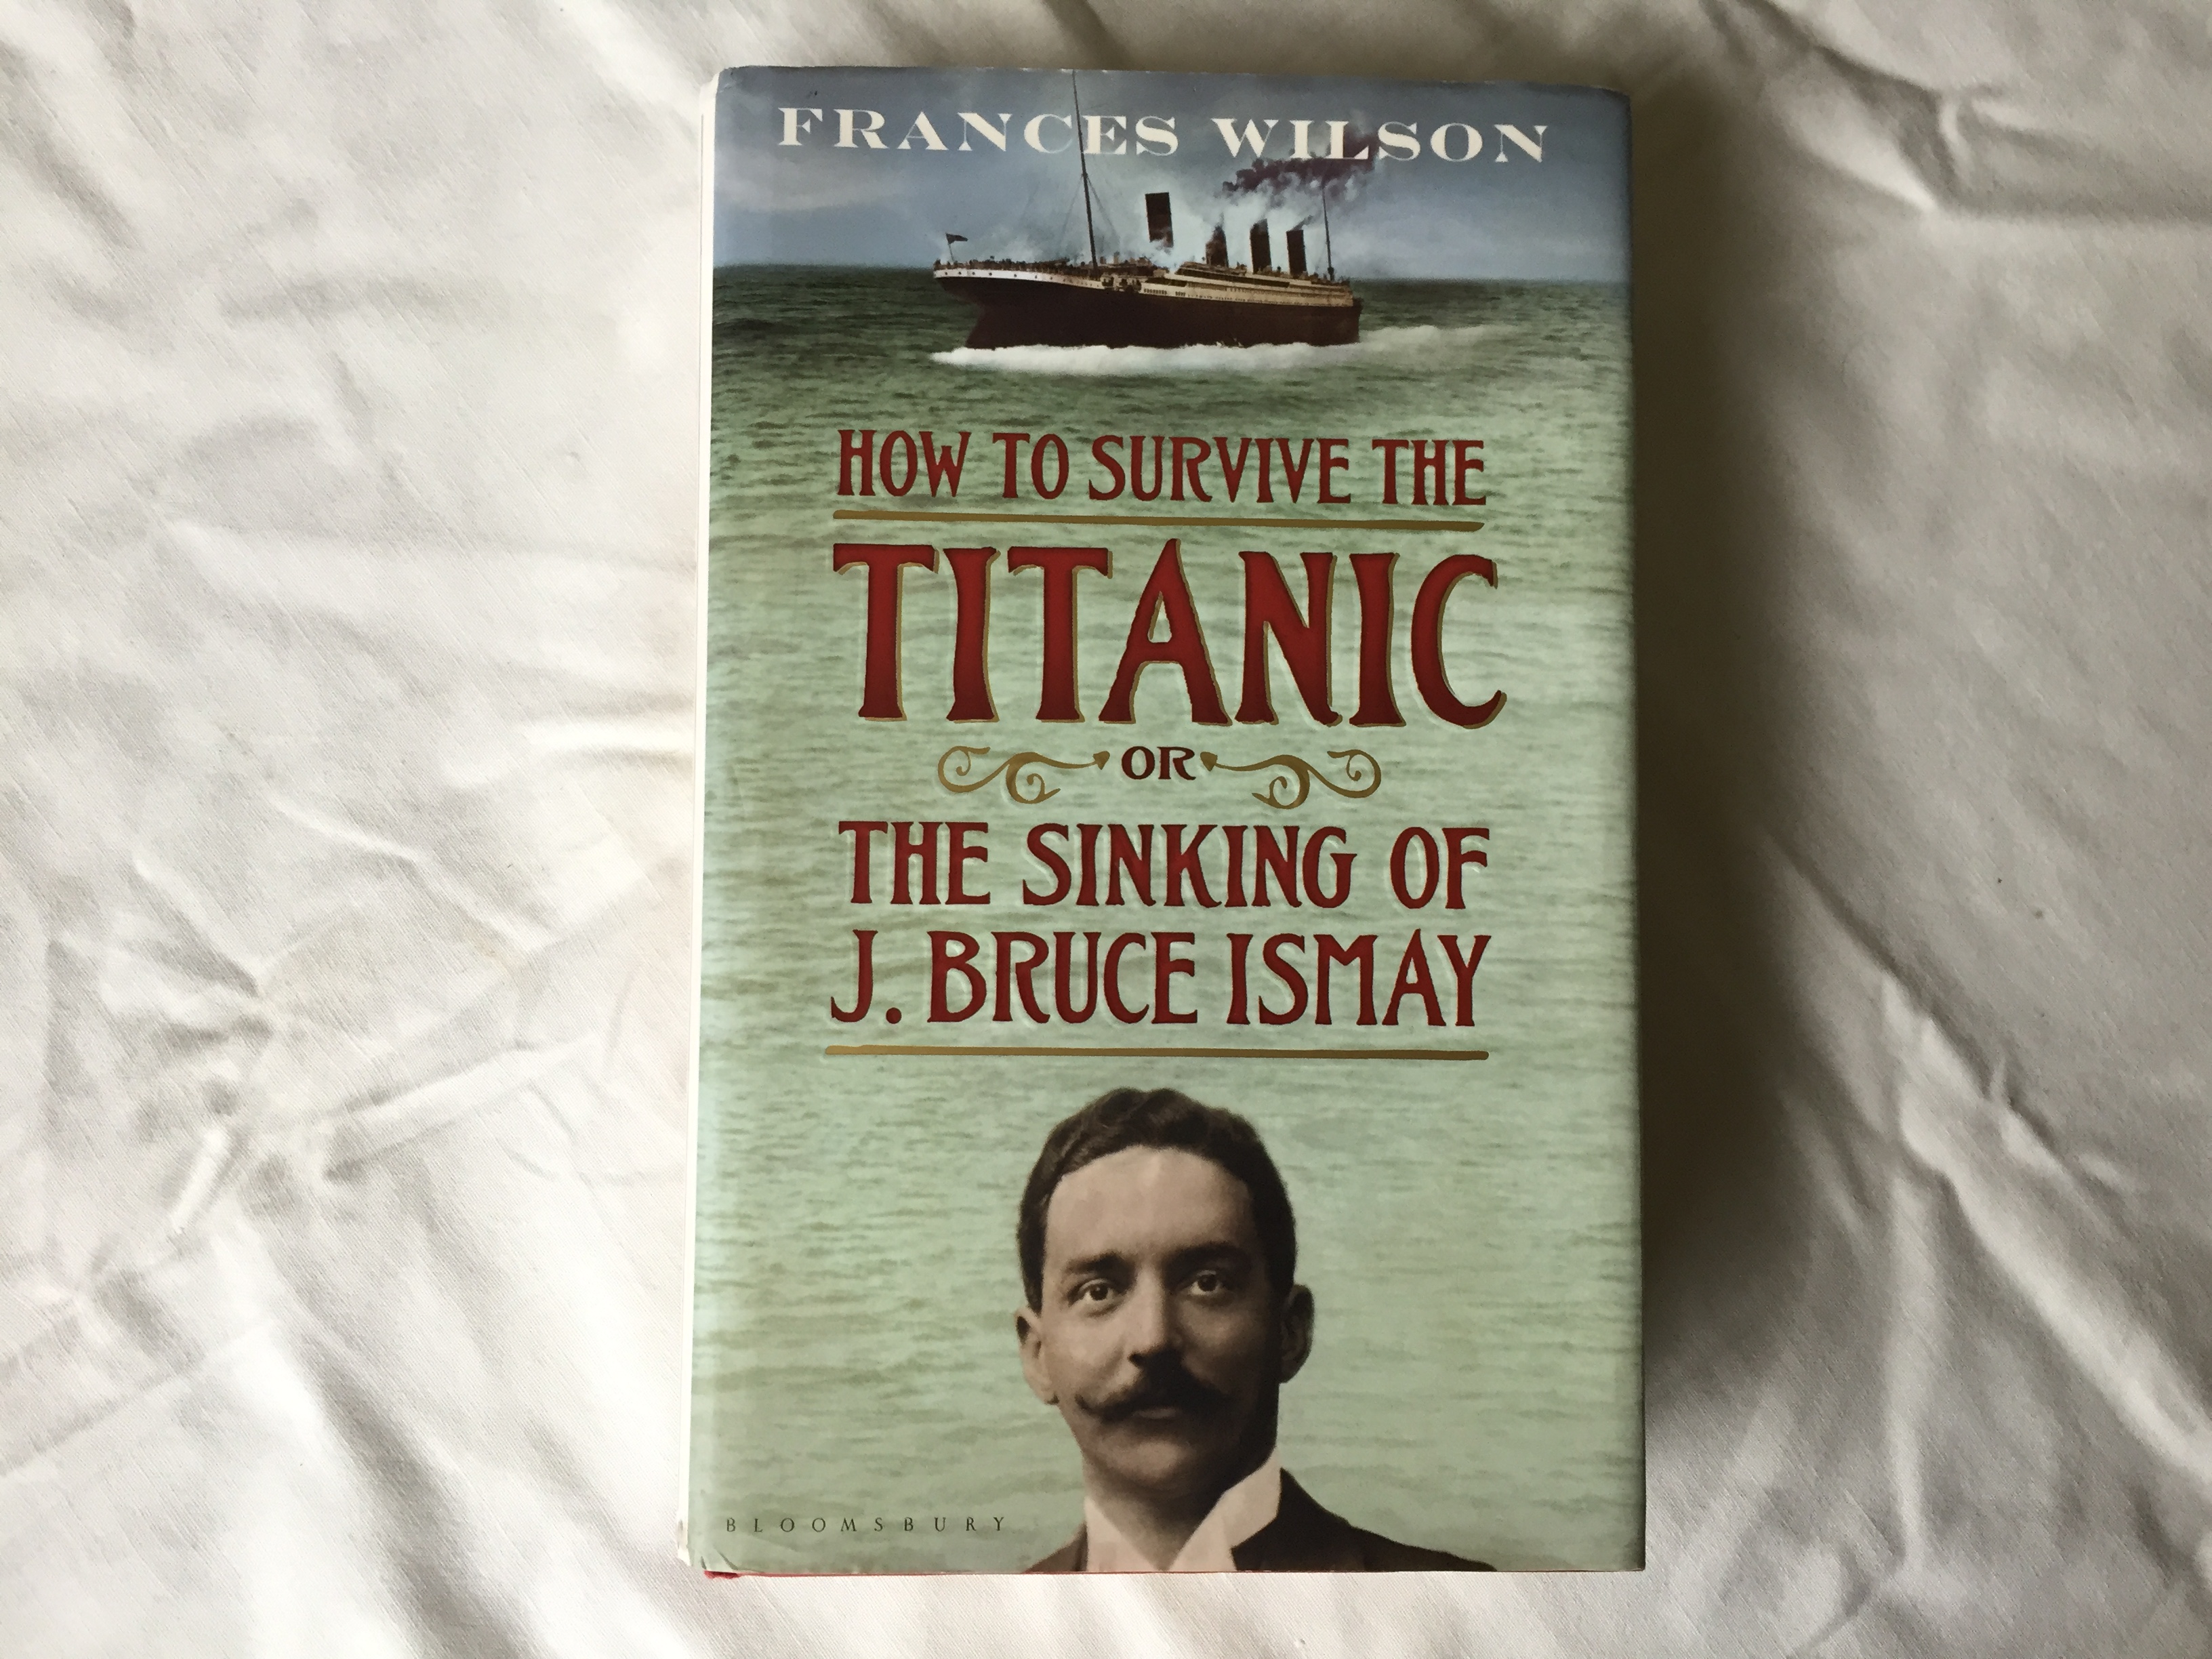 SUPERB BOOK ON THE STORY OF THE TITANIC BY FRANCES WILSON 